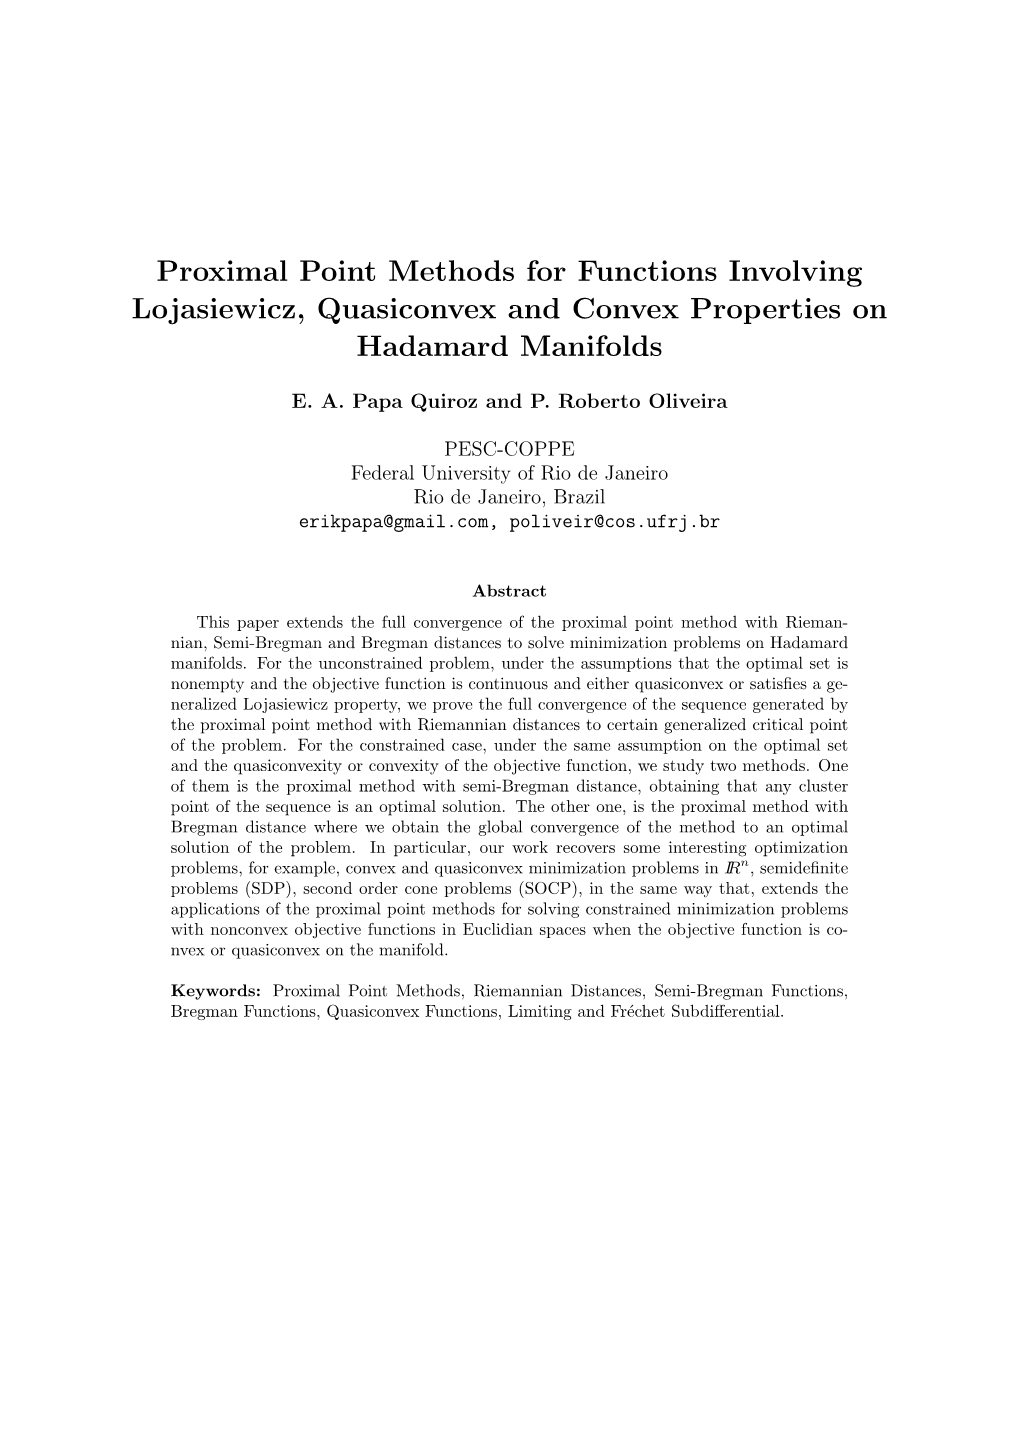 Proximal Point Methods for Functions Involving Lojasiewicz, Quasiconvex and Convex Properties on Hadamard Manifolds